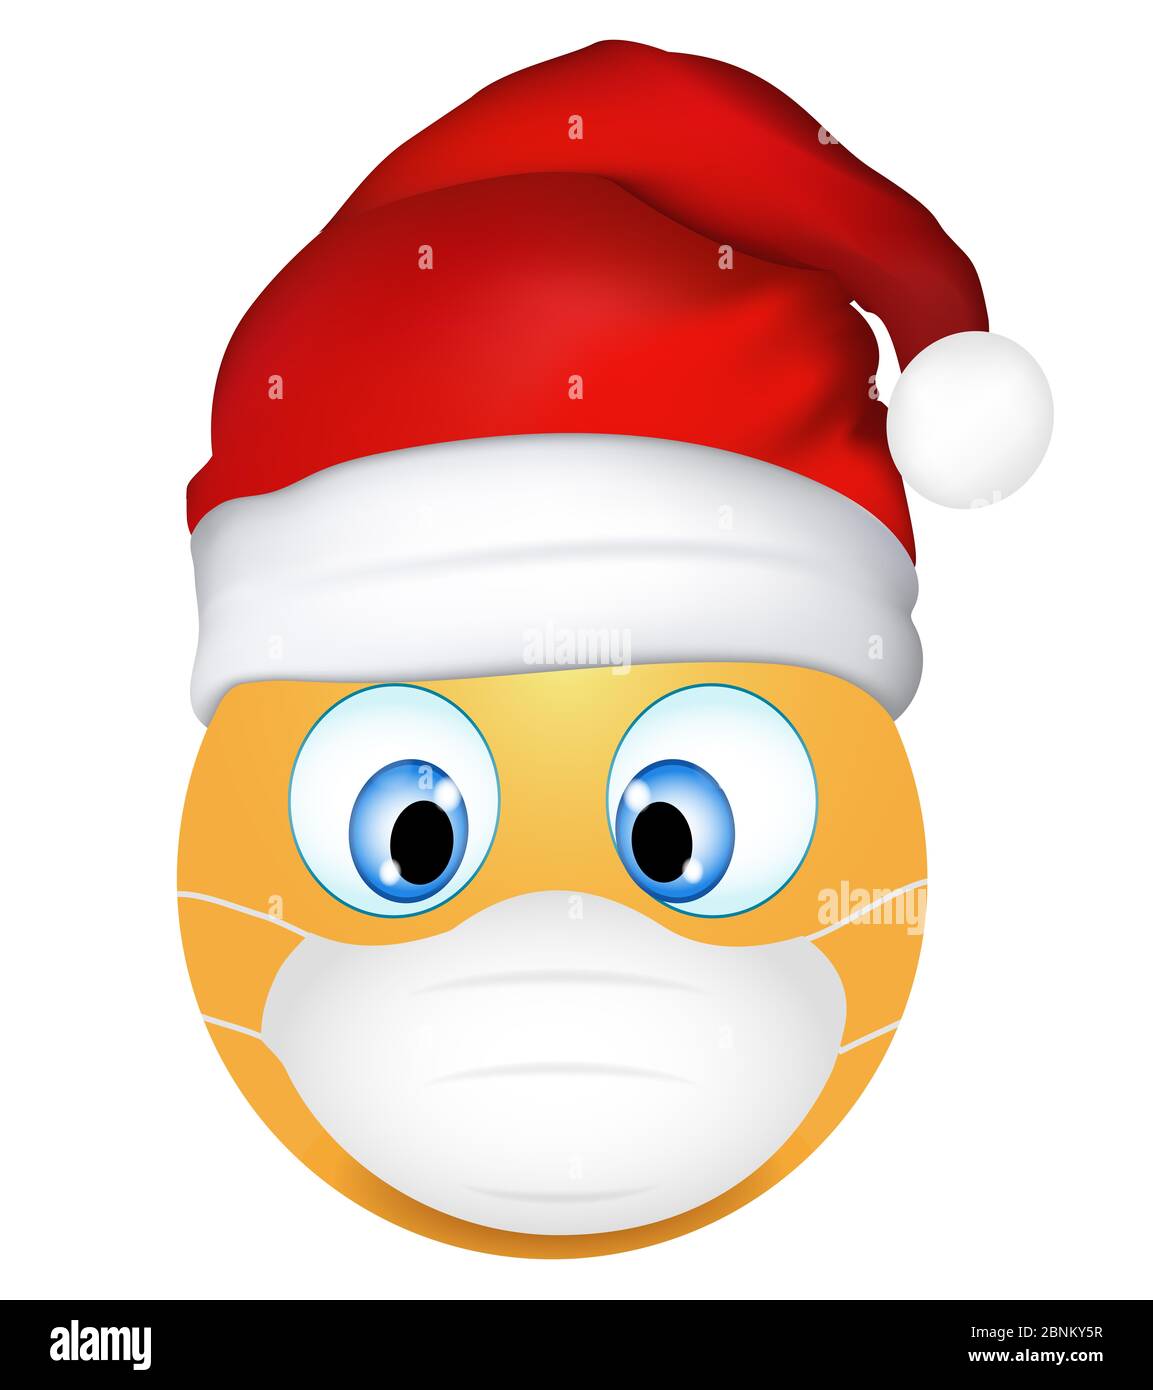 Emoji emoticon wearing medical mask and Santa Claus hat. Funny emoticon. Coronavirus outbreak protection concept. Merry Christmas. 3d illustration. Stock Photo